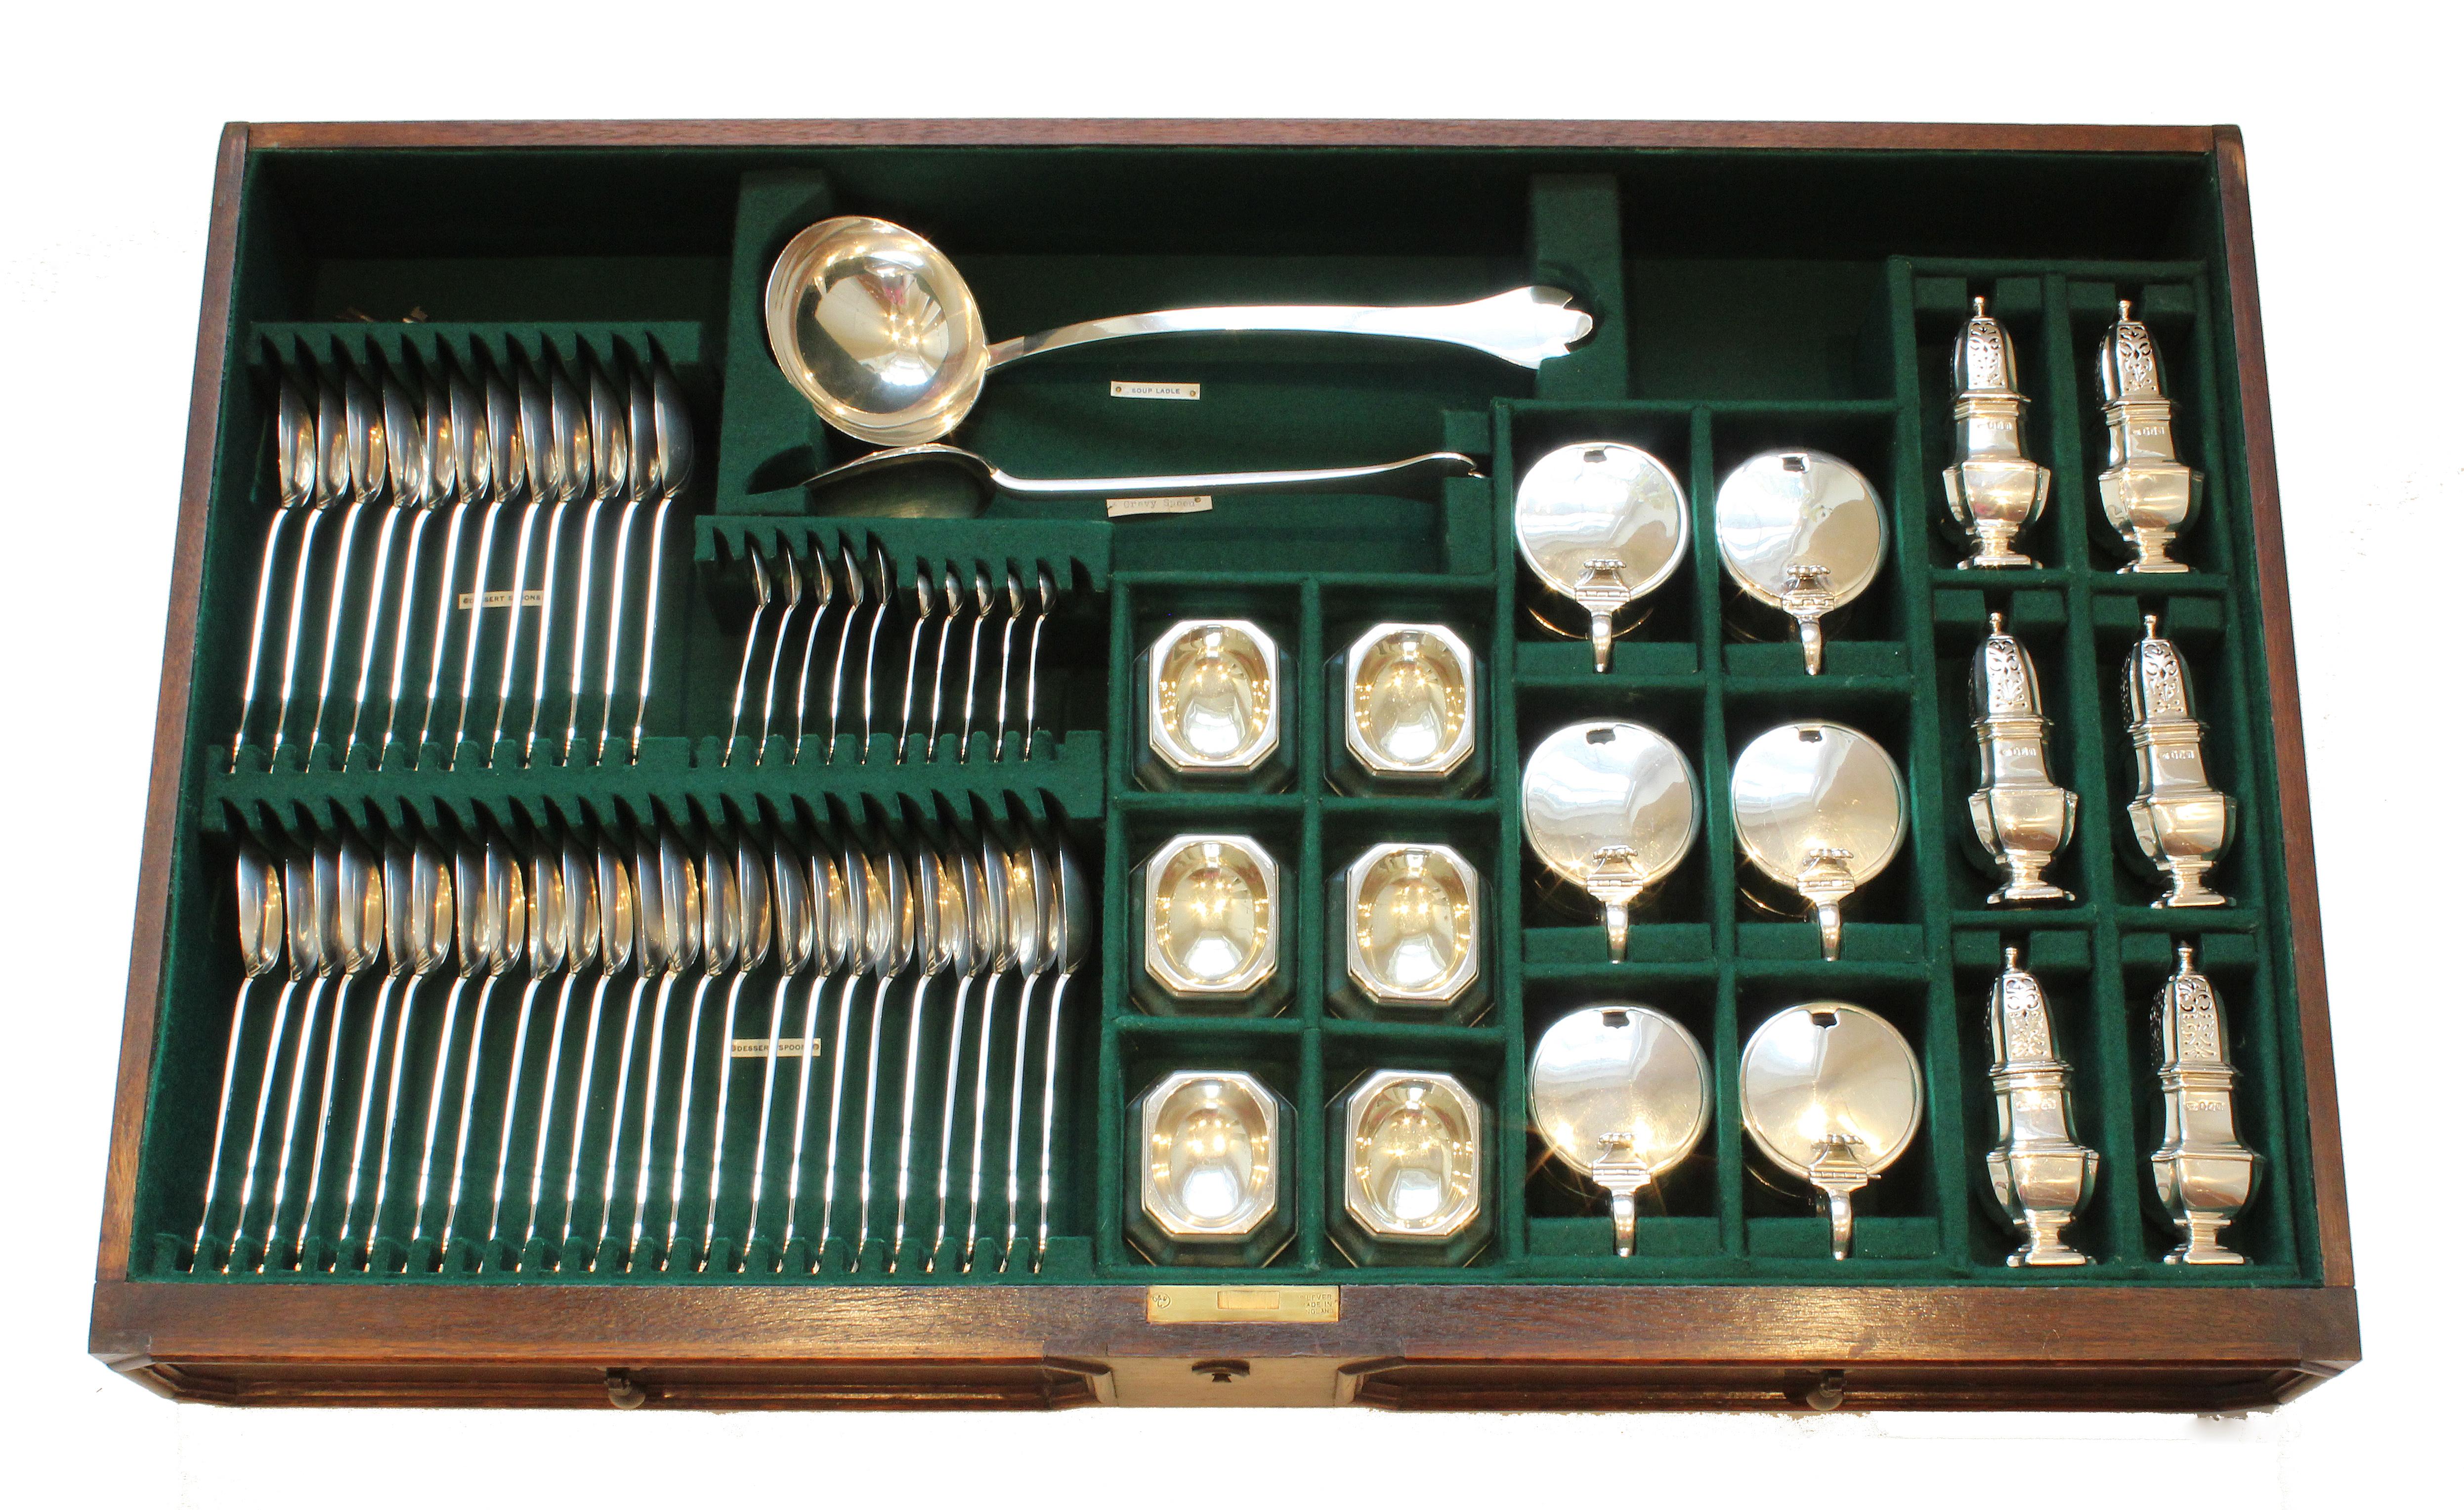 A very fine and extensive 255 piece canteen of silver trefid pattern flatware for 36 people, made by  Garrards of London.  This rare trefid pattern service was made in 1911, the year of the coronation of King George V, by Sebastion Garrard of